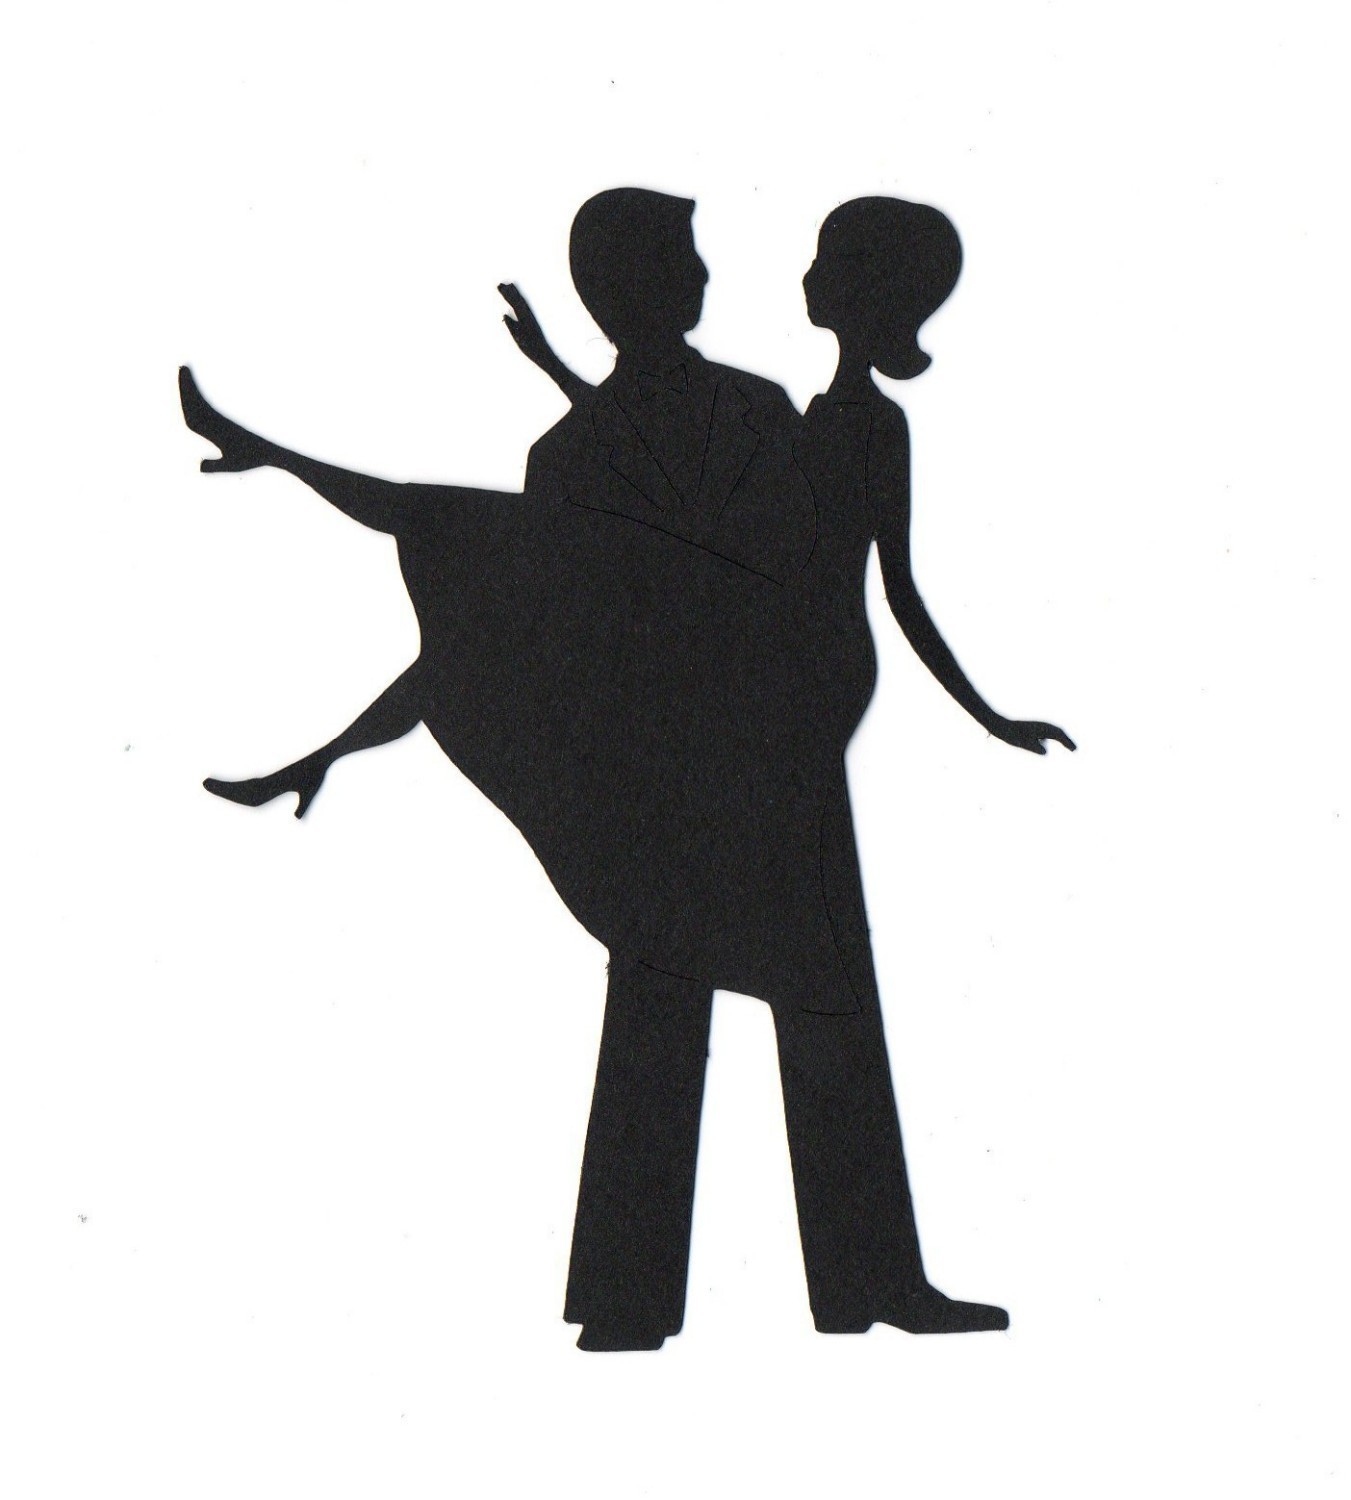 Wedding Mr and Mrs Silhouette die cut for by simplymadescrapbooks